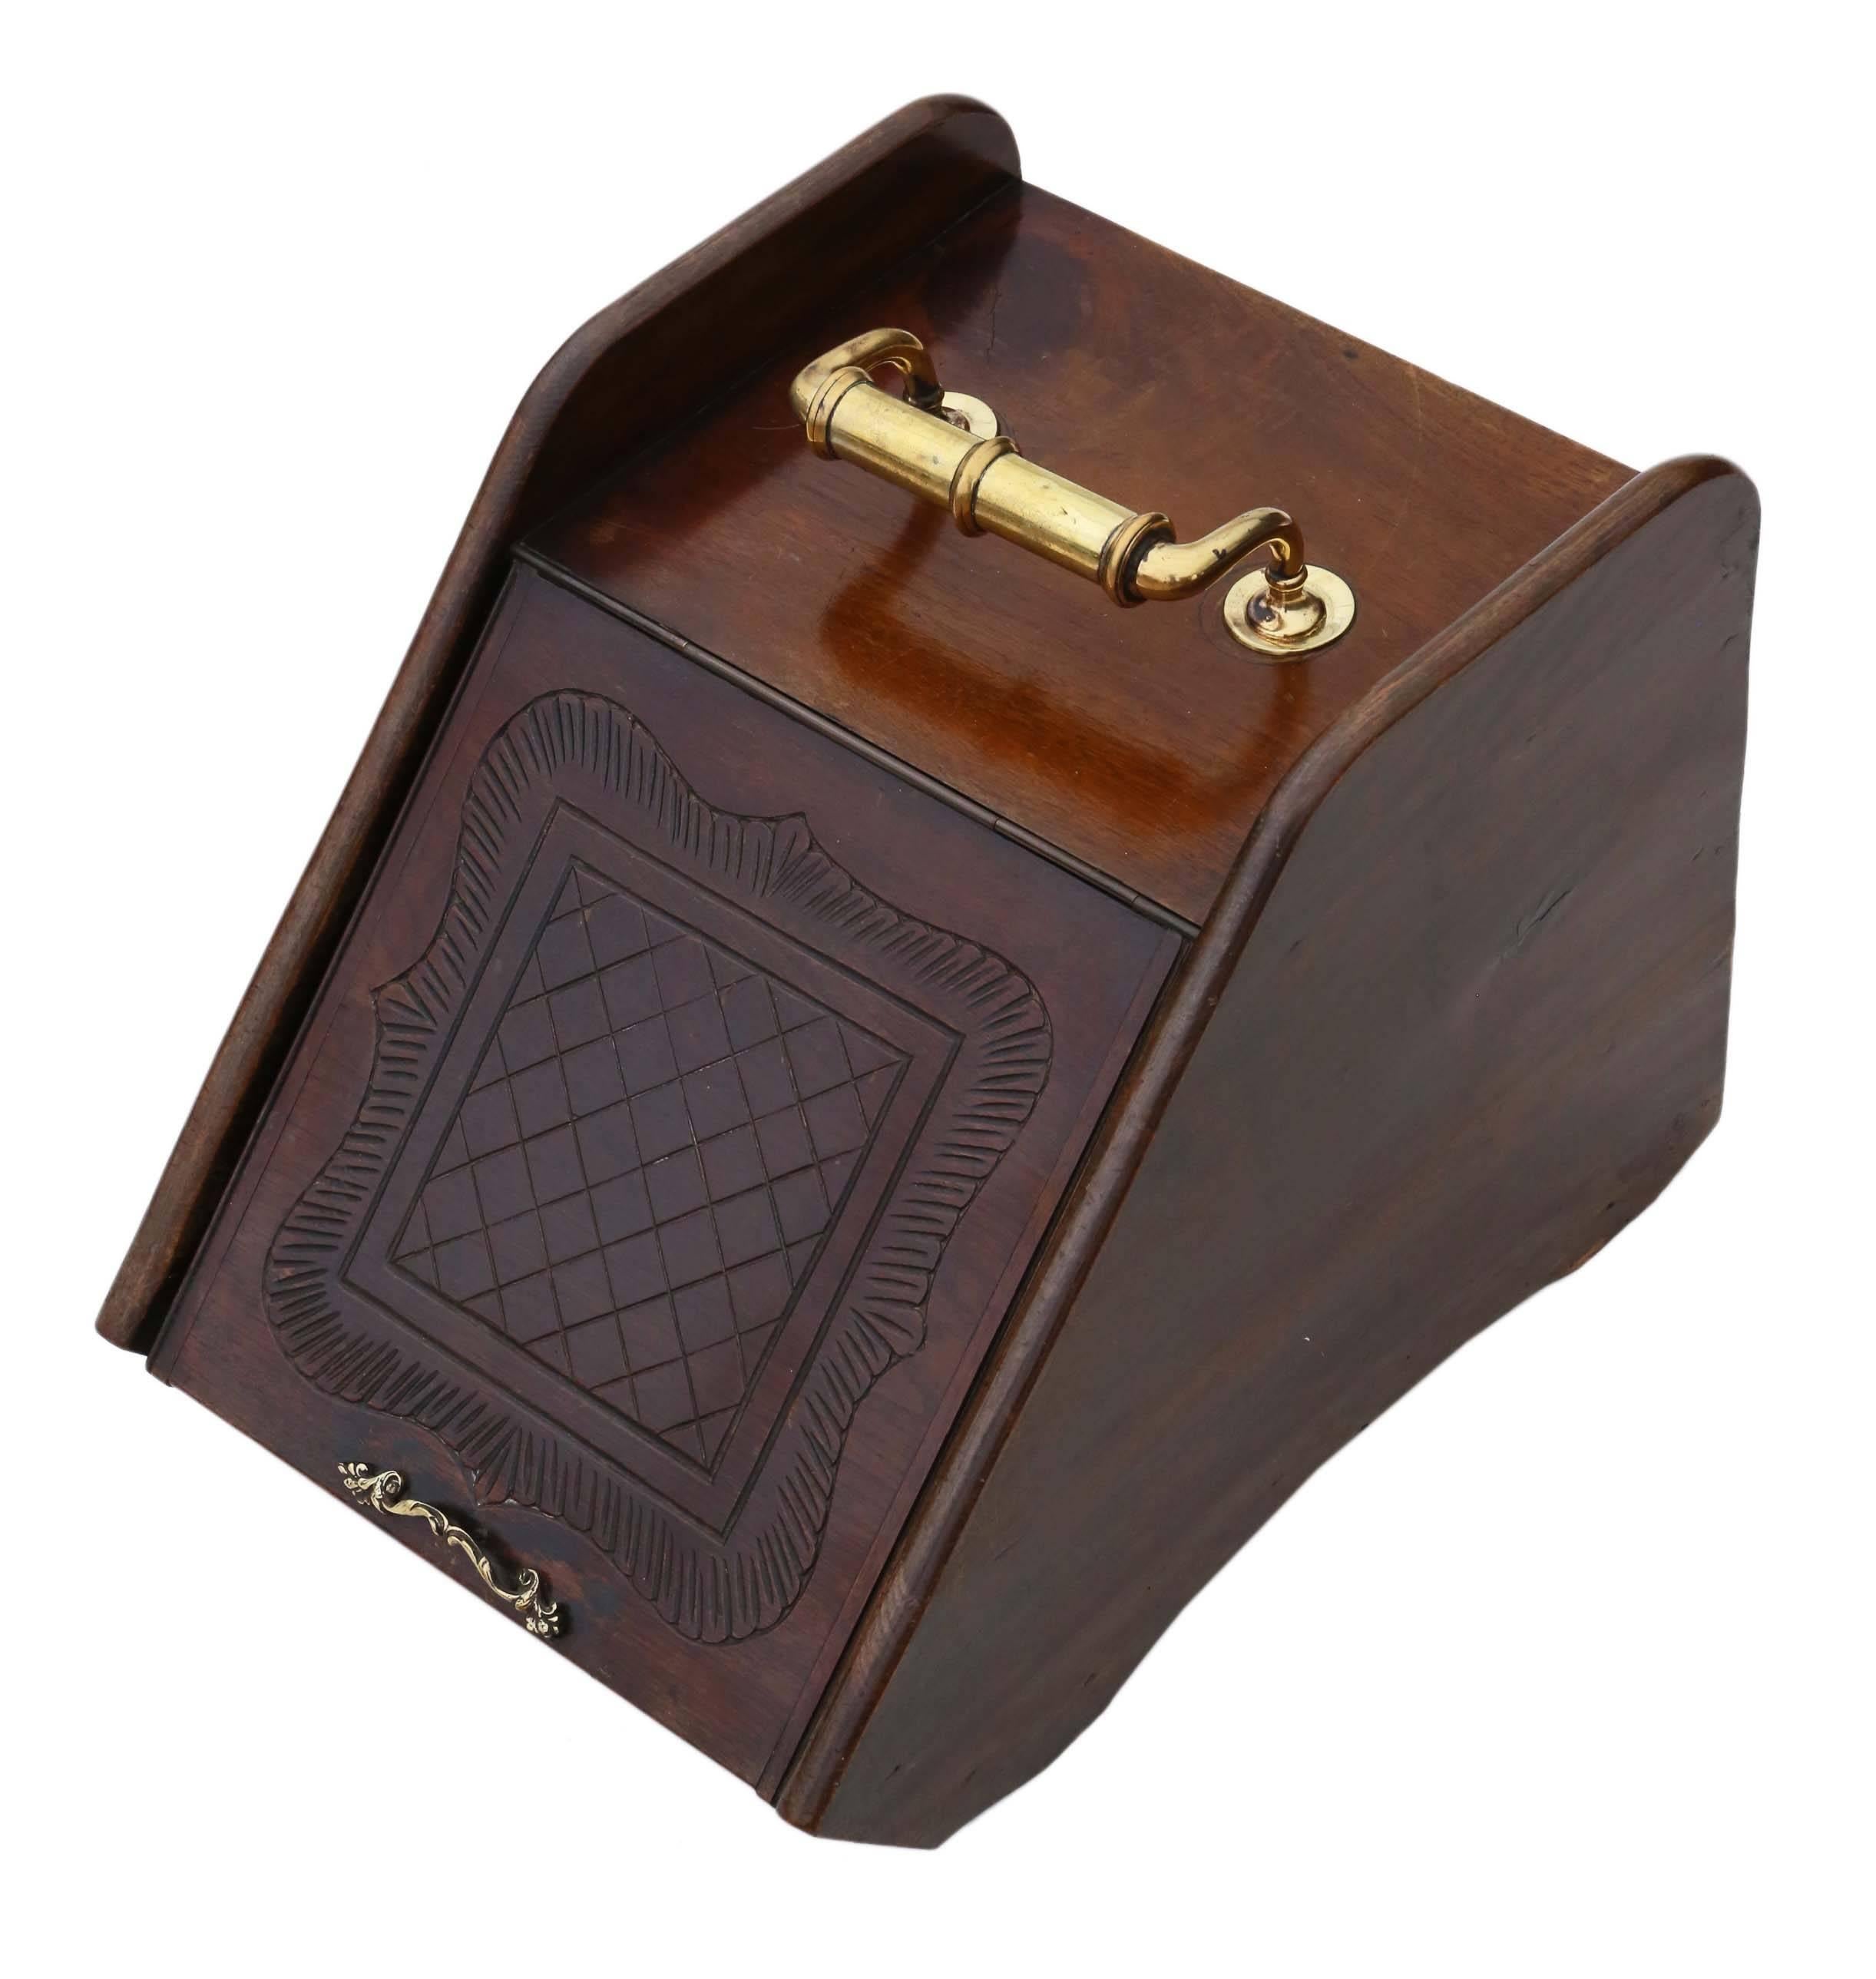 Antique Victorian, circa 1900 carved walnut coal scuttle box or purdonium.

A heavy and solid piece, with no woodworm. The door works Fine.

This is a lovely rare quality piece, that is full of age charm and character. Complete with a brass